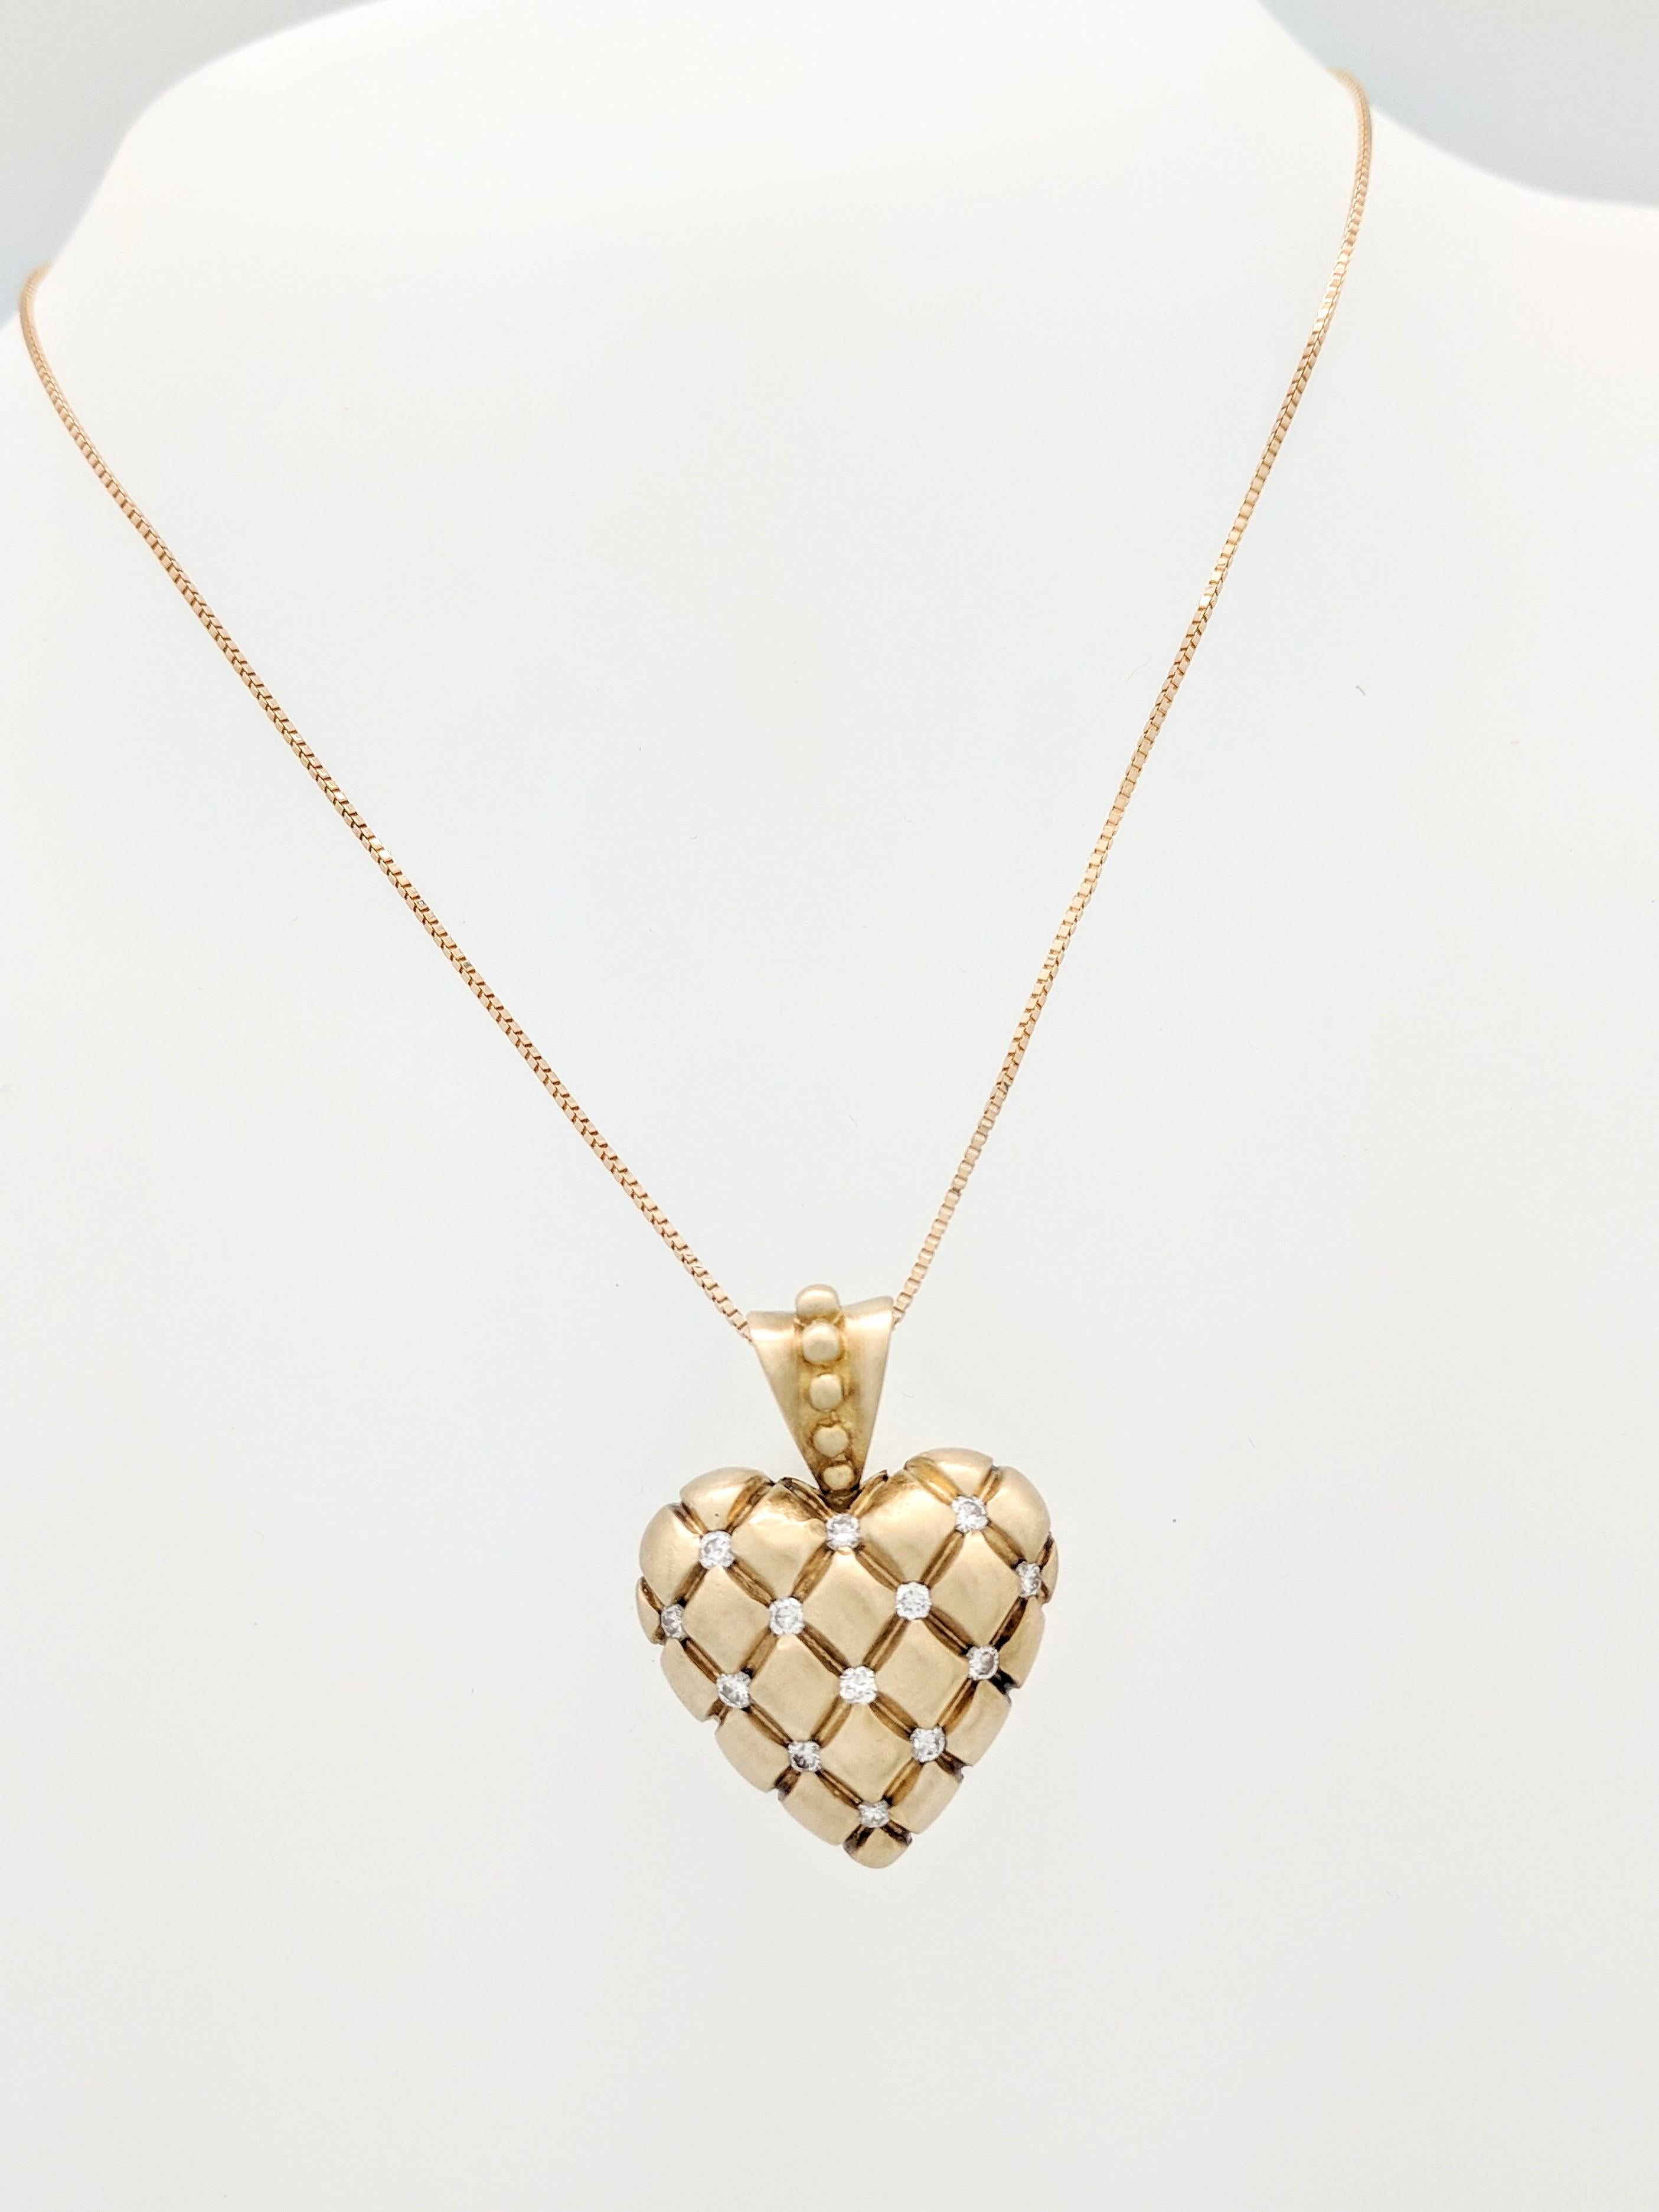 You are viewing a Beautiful Diamond Heart Pendant Necklace. This piece is crafted from 14k yellow gold and weighs 15.4 gram. It features (11) .03ct round brilliant cut diamonds for an estimated .33ctw. The pendant measures 1.25